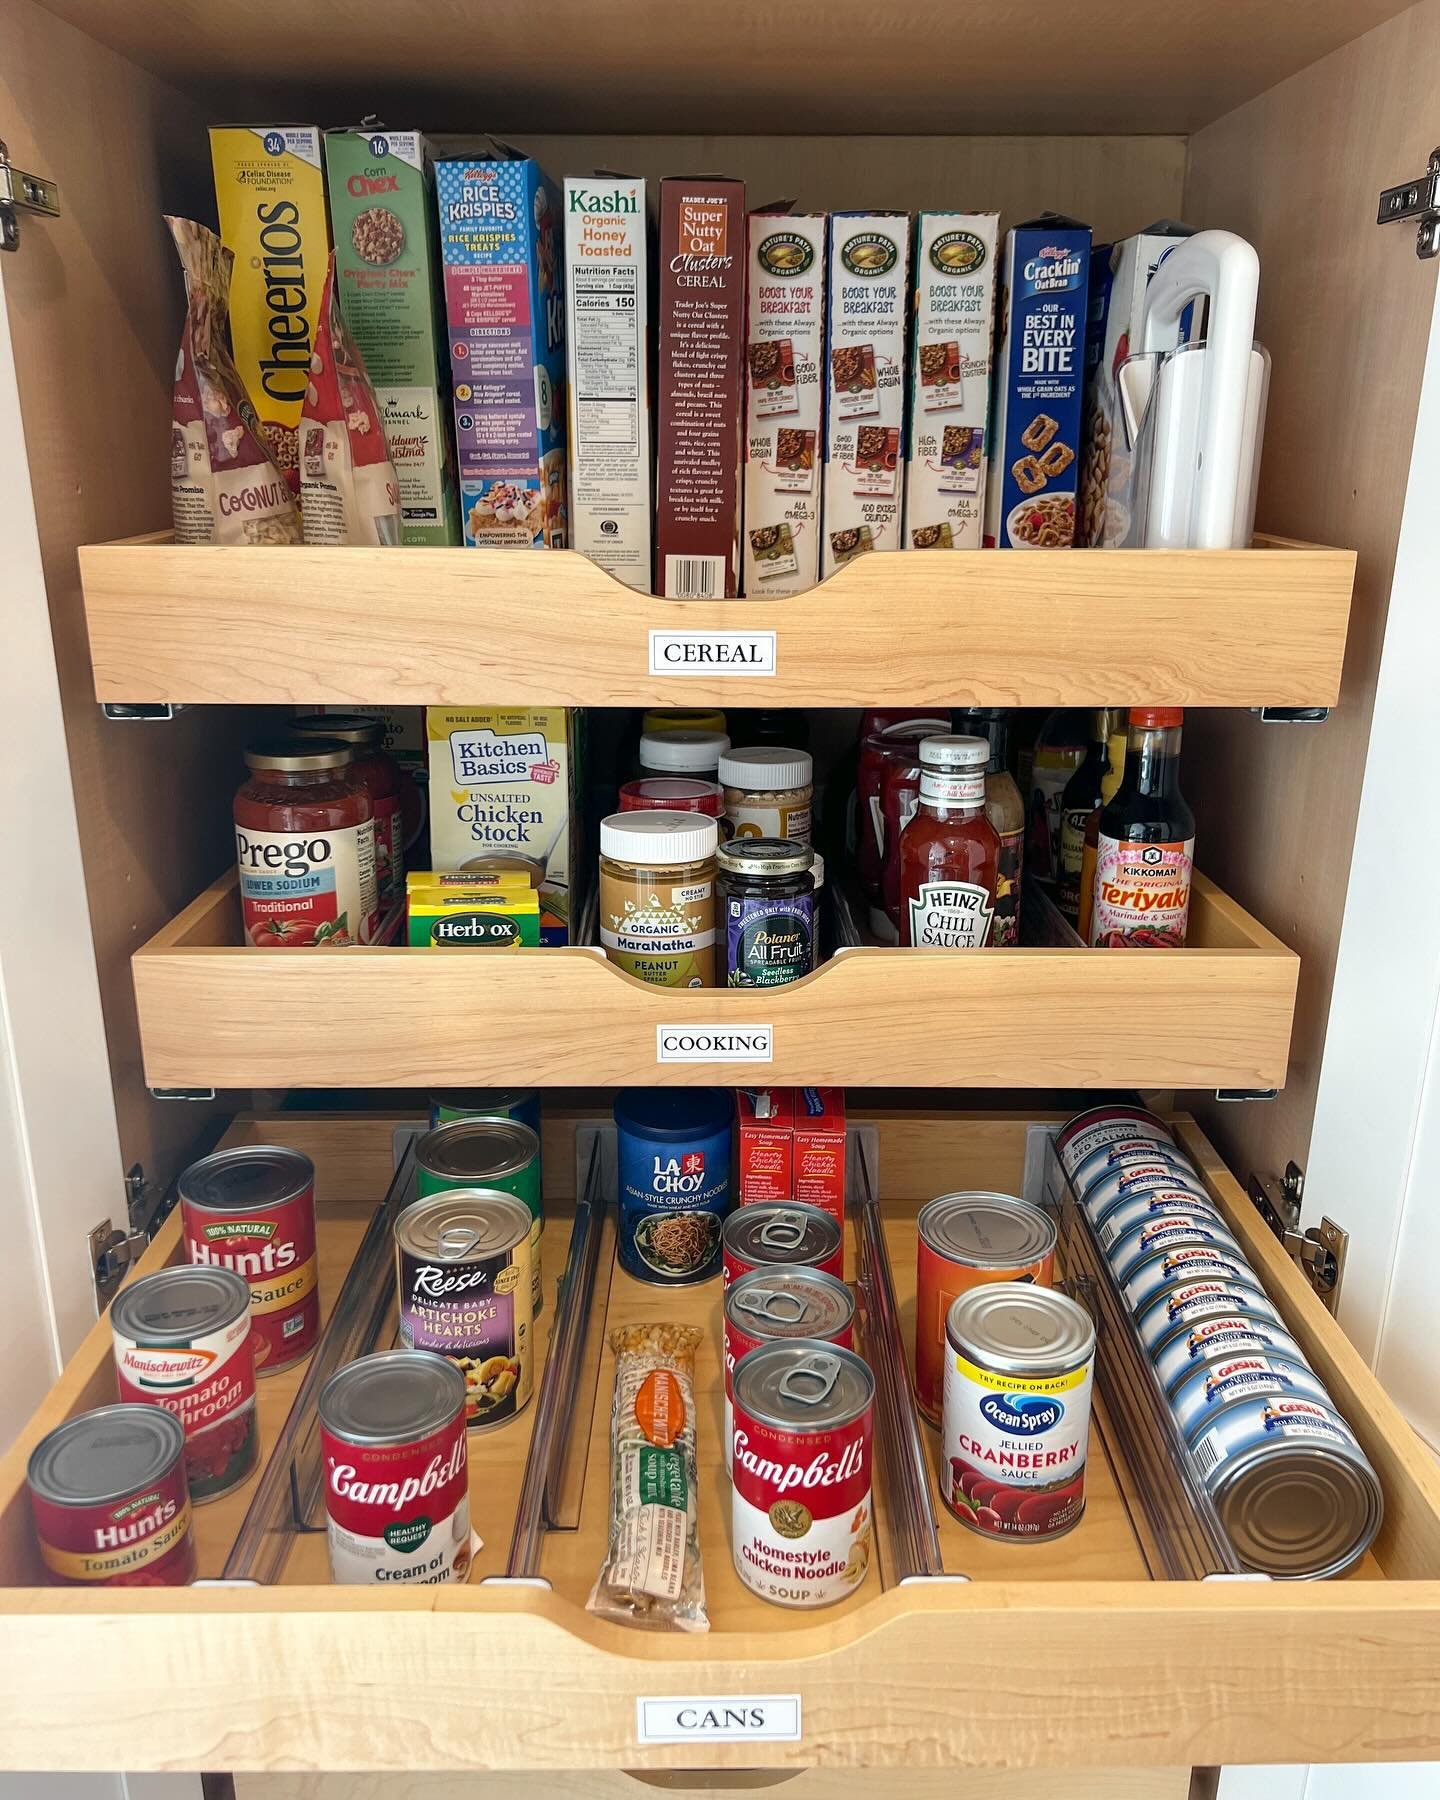 Cooking up some serious pantry organization goals! 🥫✨

Pro Tip: Categorize items for easy access. Group similar items together, such as grains, canned goods, snacks, etc. Use bins or baskets to contain smaller items and keep shelves tidy. 

Ready to